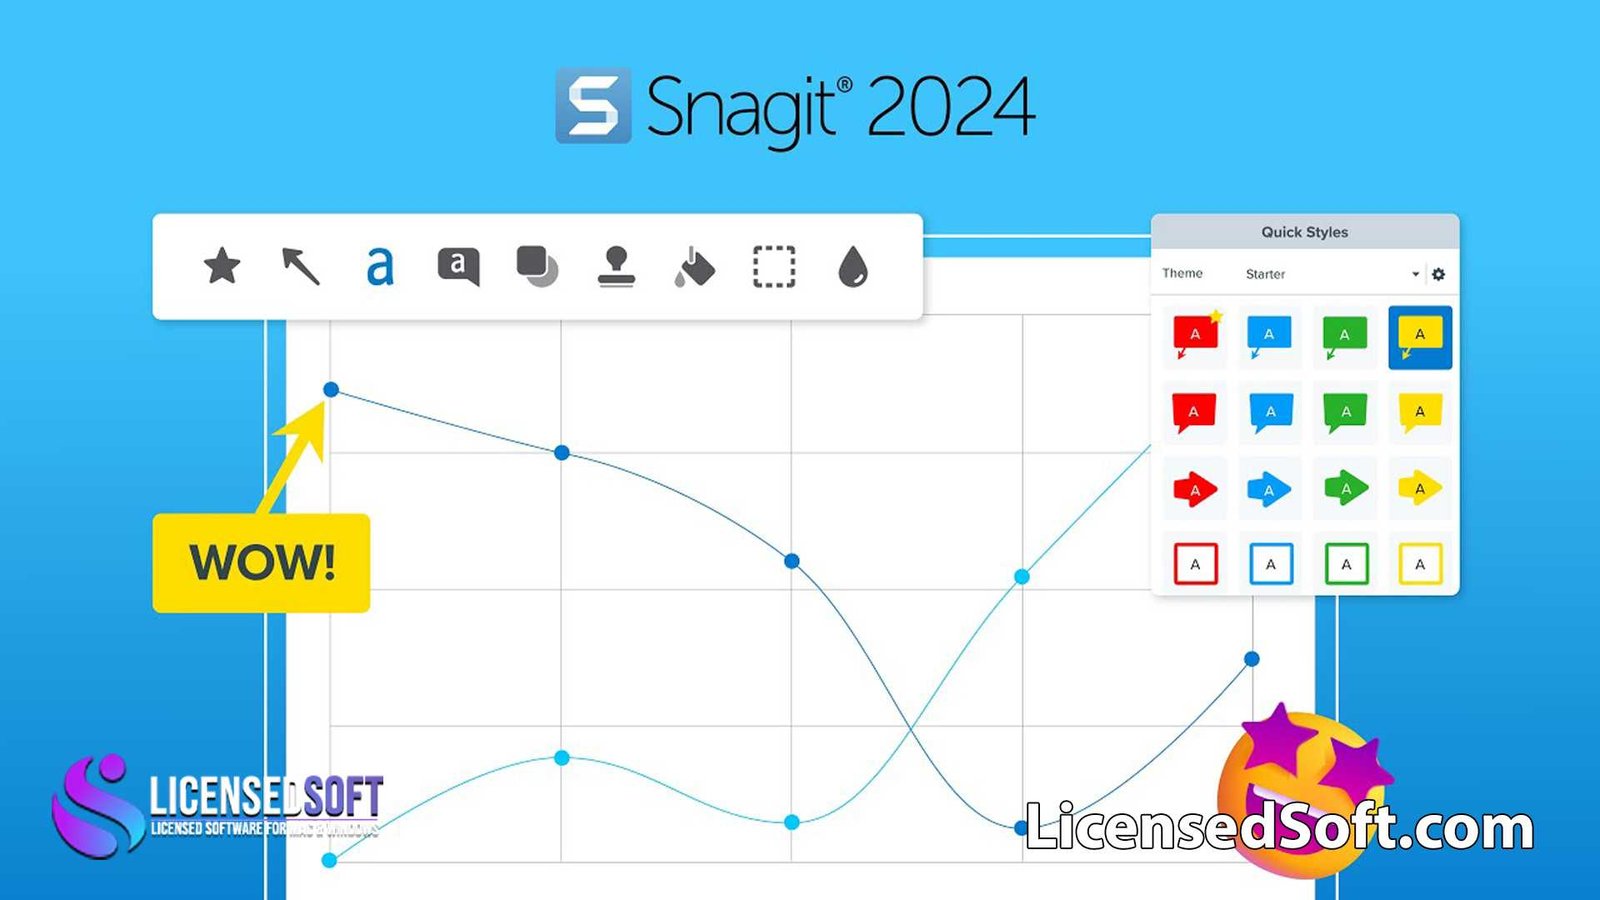 TechSmith Snagit 2024 By LicensedSoft